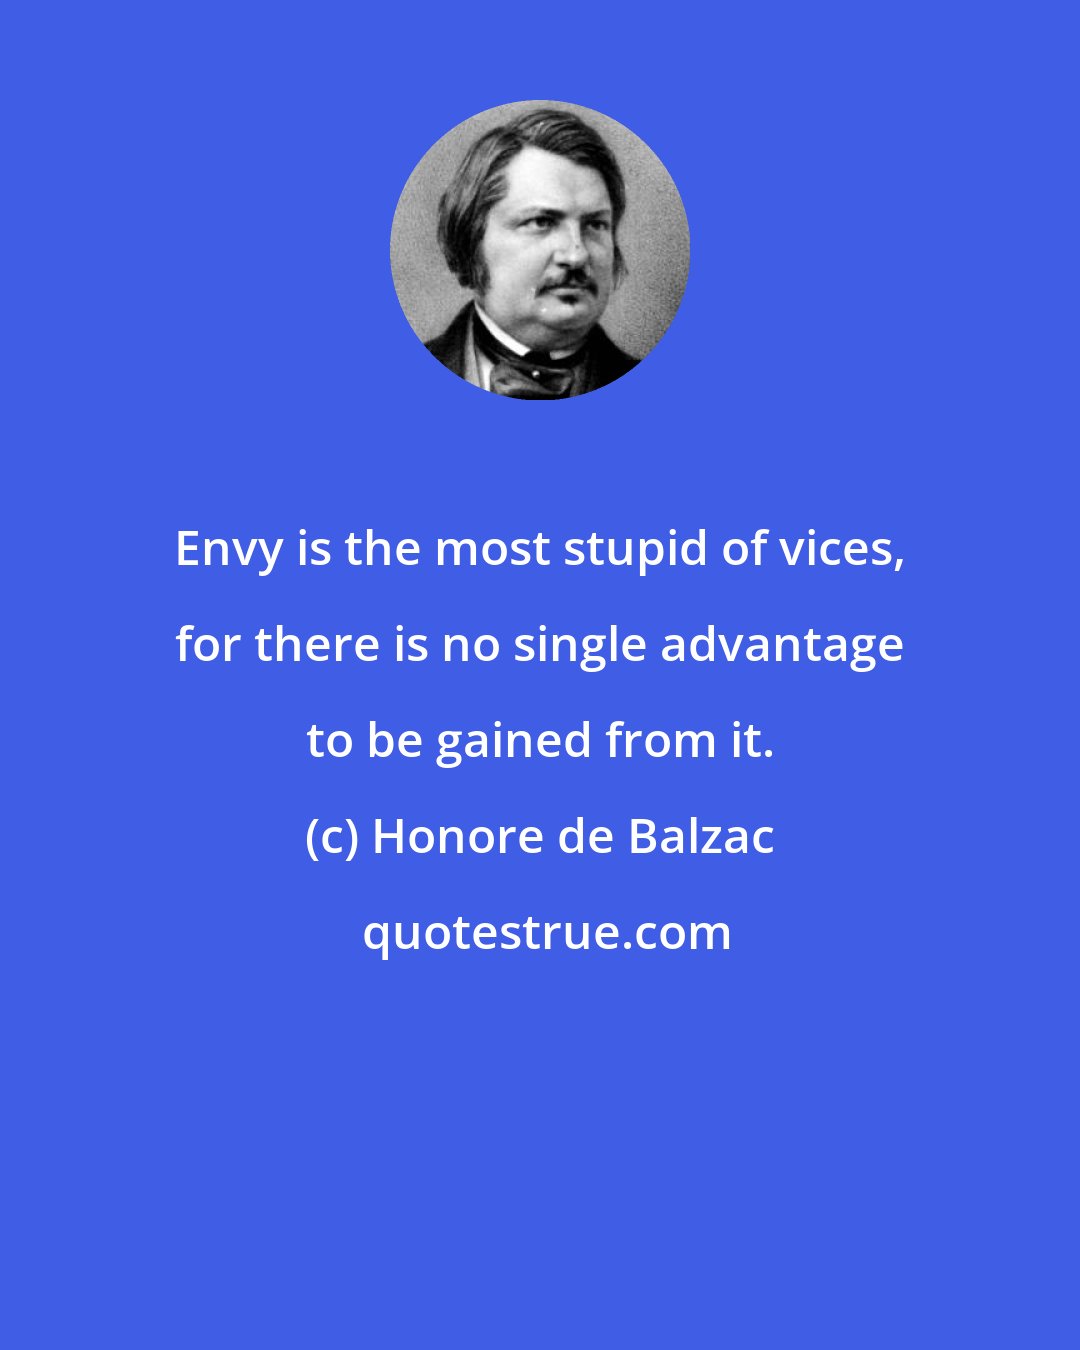 Honore de Balzac: Envy is the most stupid of vices, for there is no single advantage to be gained from it.